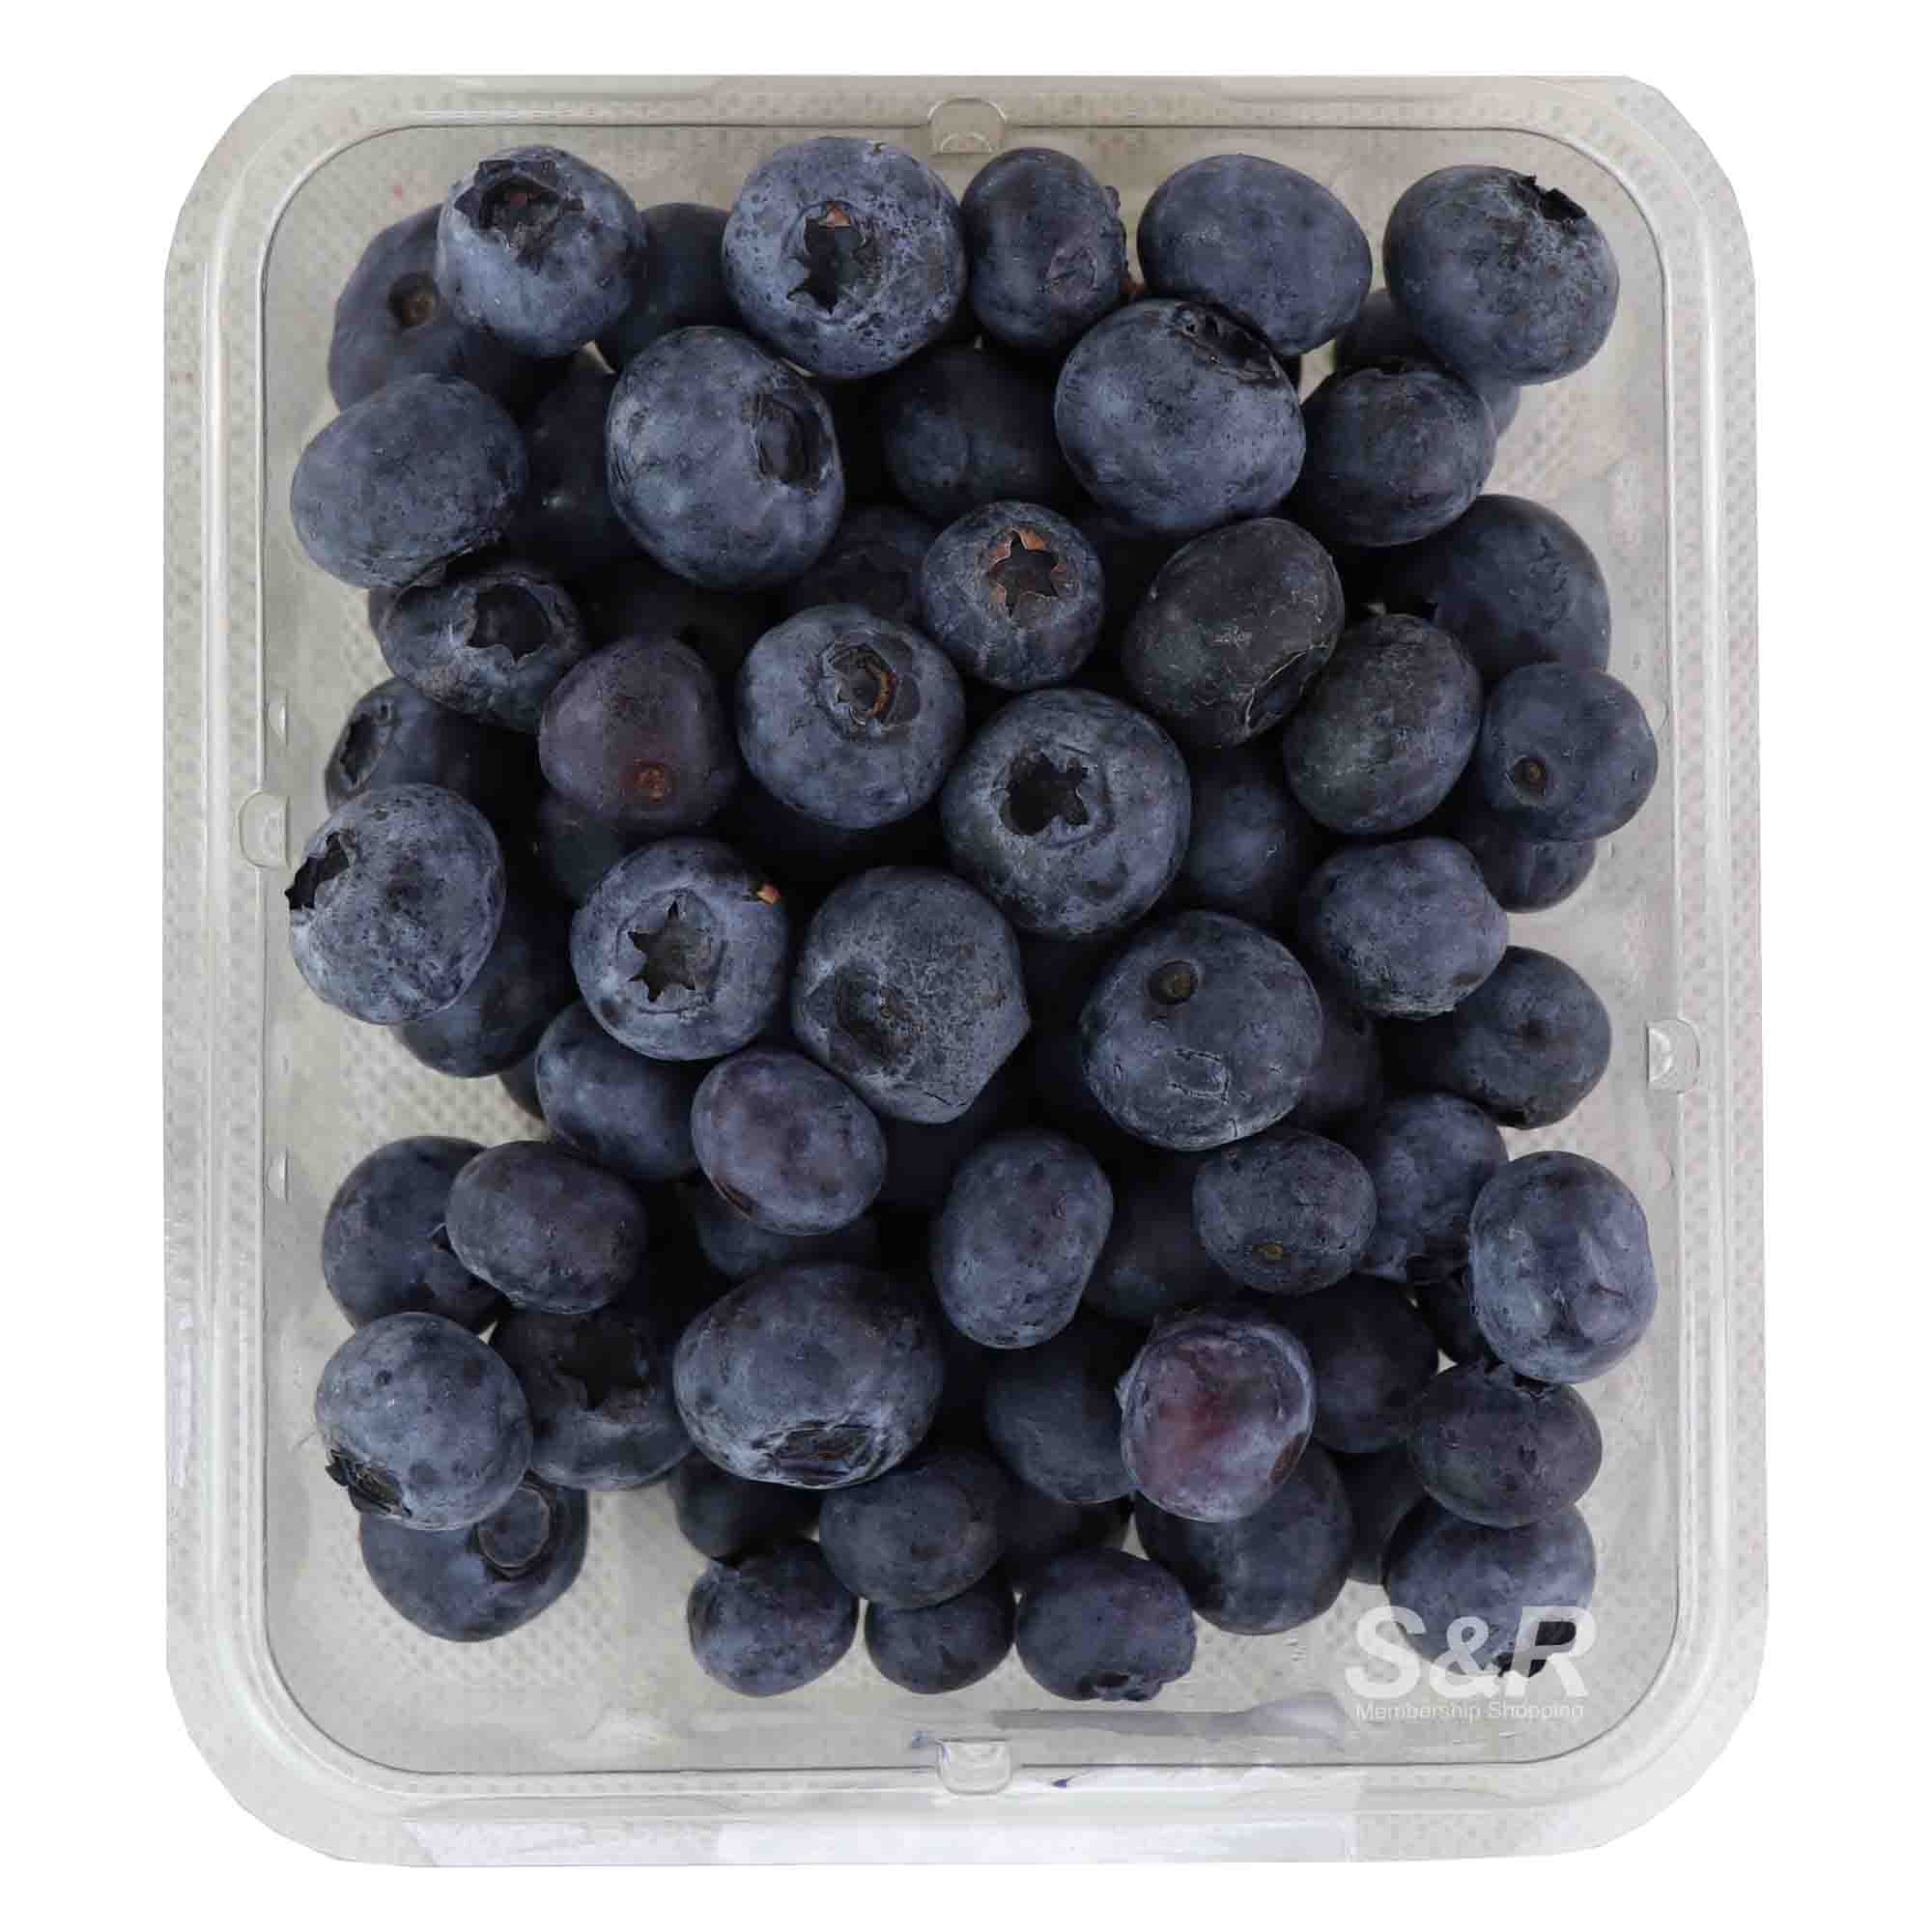 S&R US Blueberry 170g